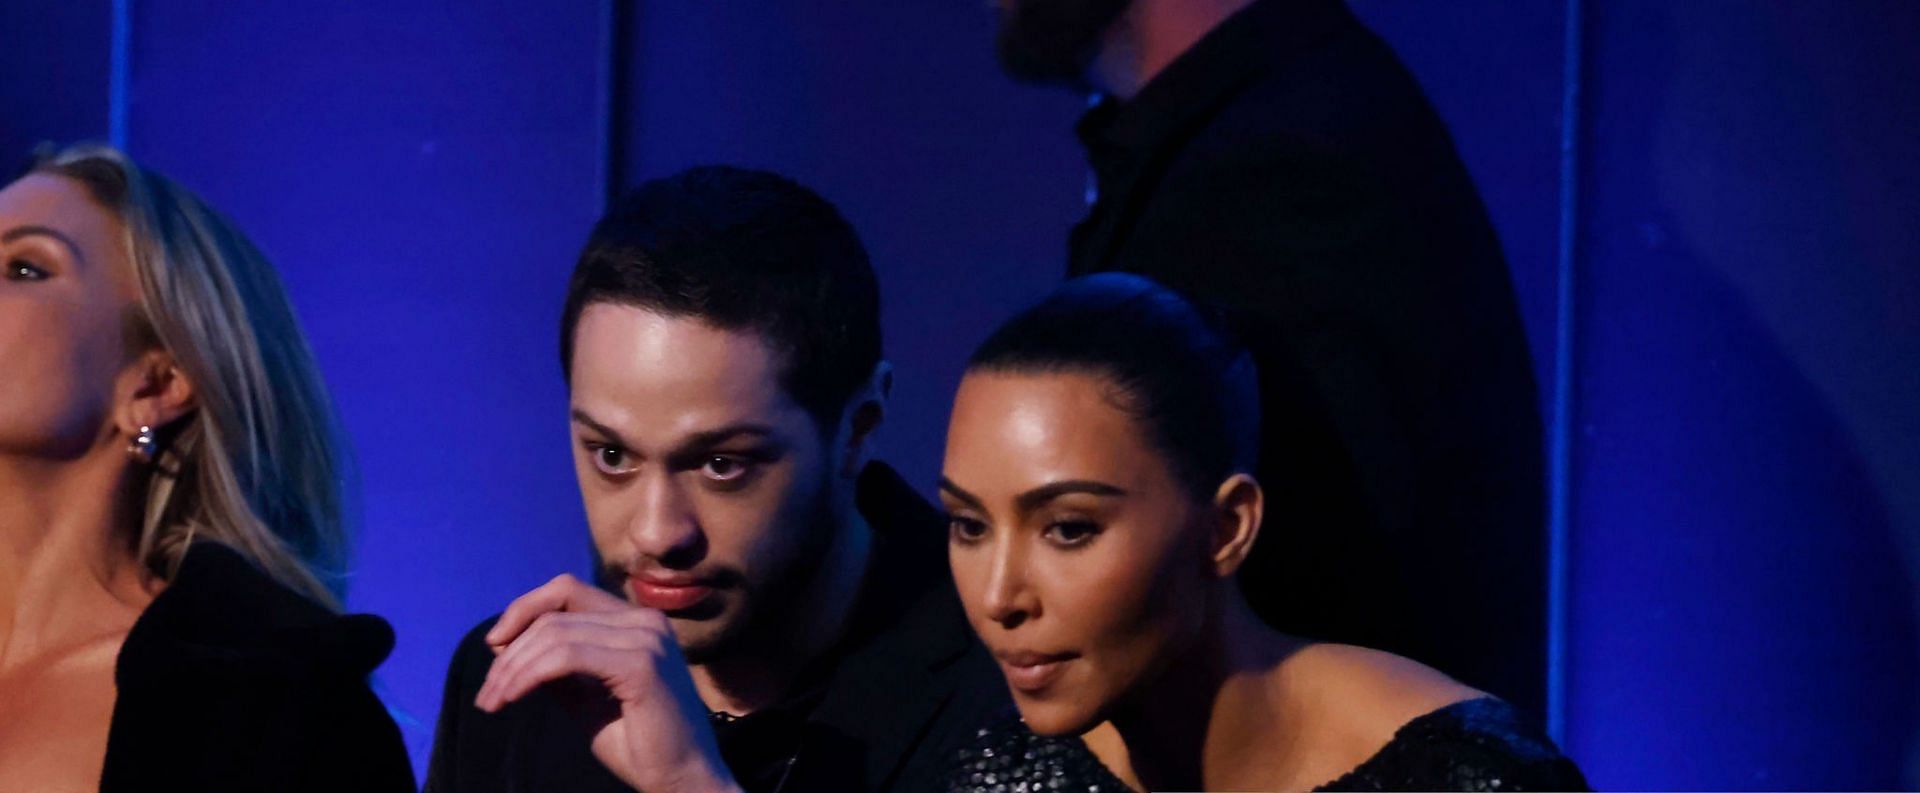 Kim Kardashian and Pete Davidson started dating in October last year (Image via Getty Images)